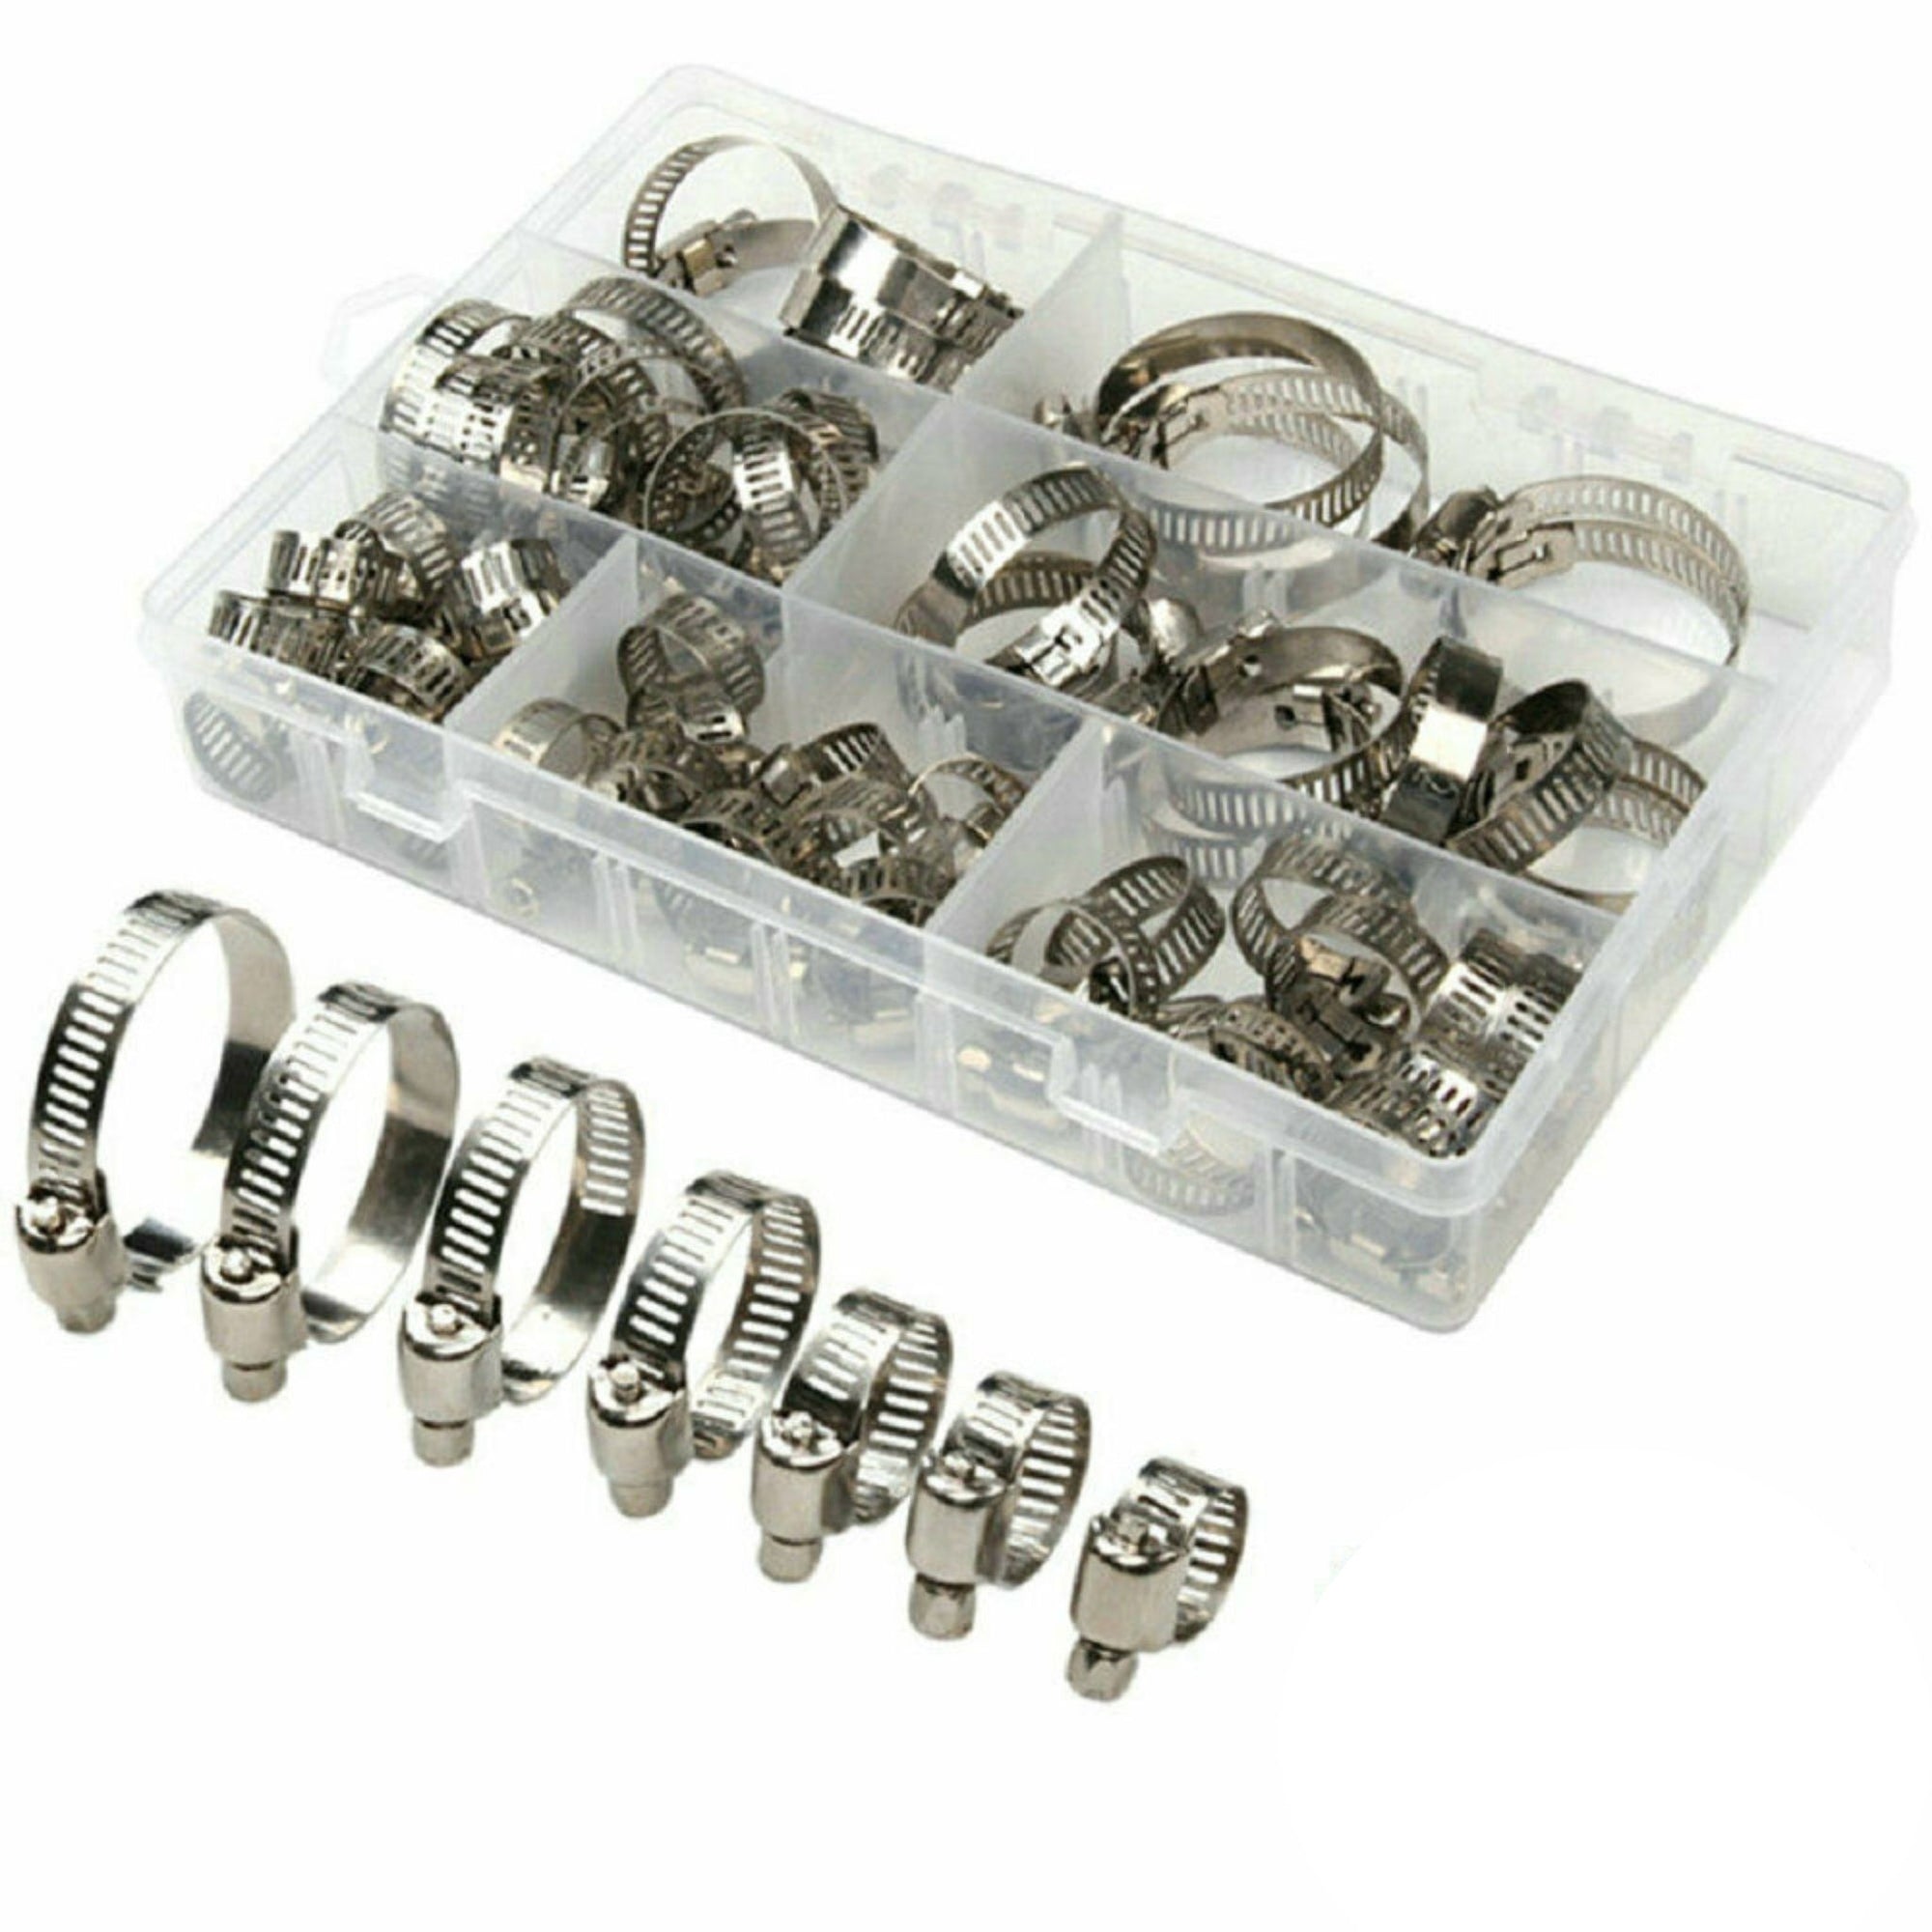 91 Piece Stainless Steel Hose Clamp Set - South East Clearance Centre